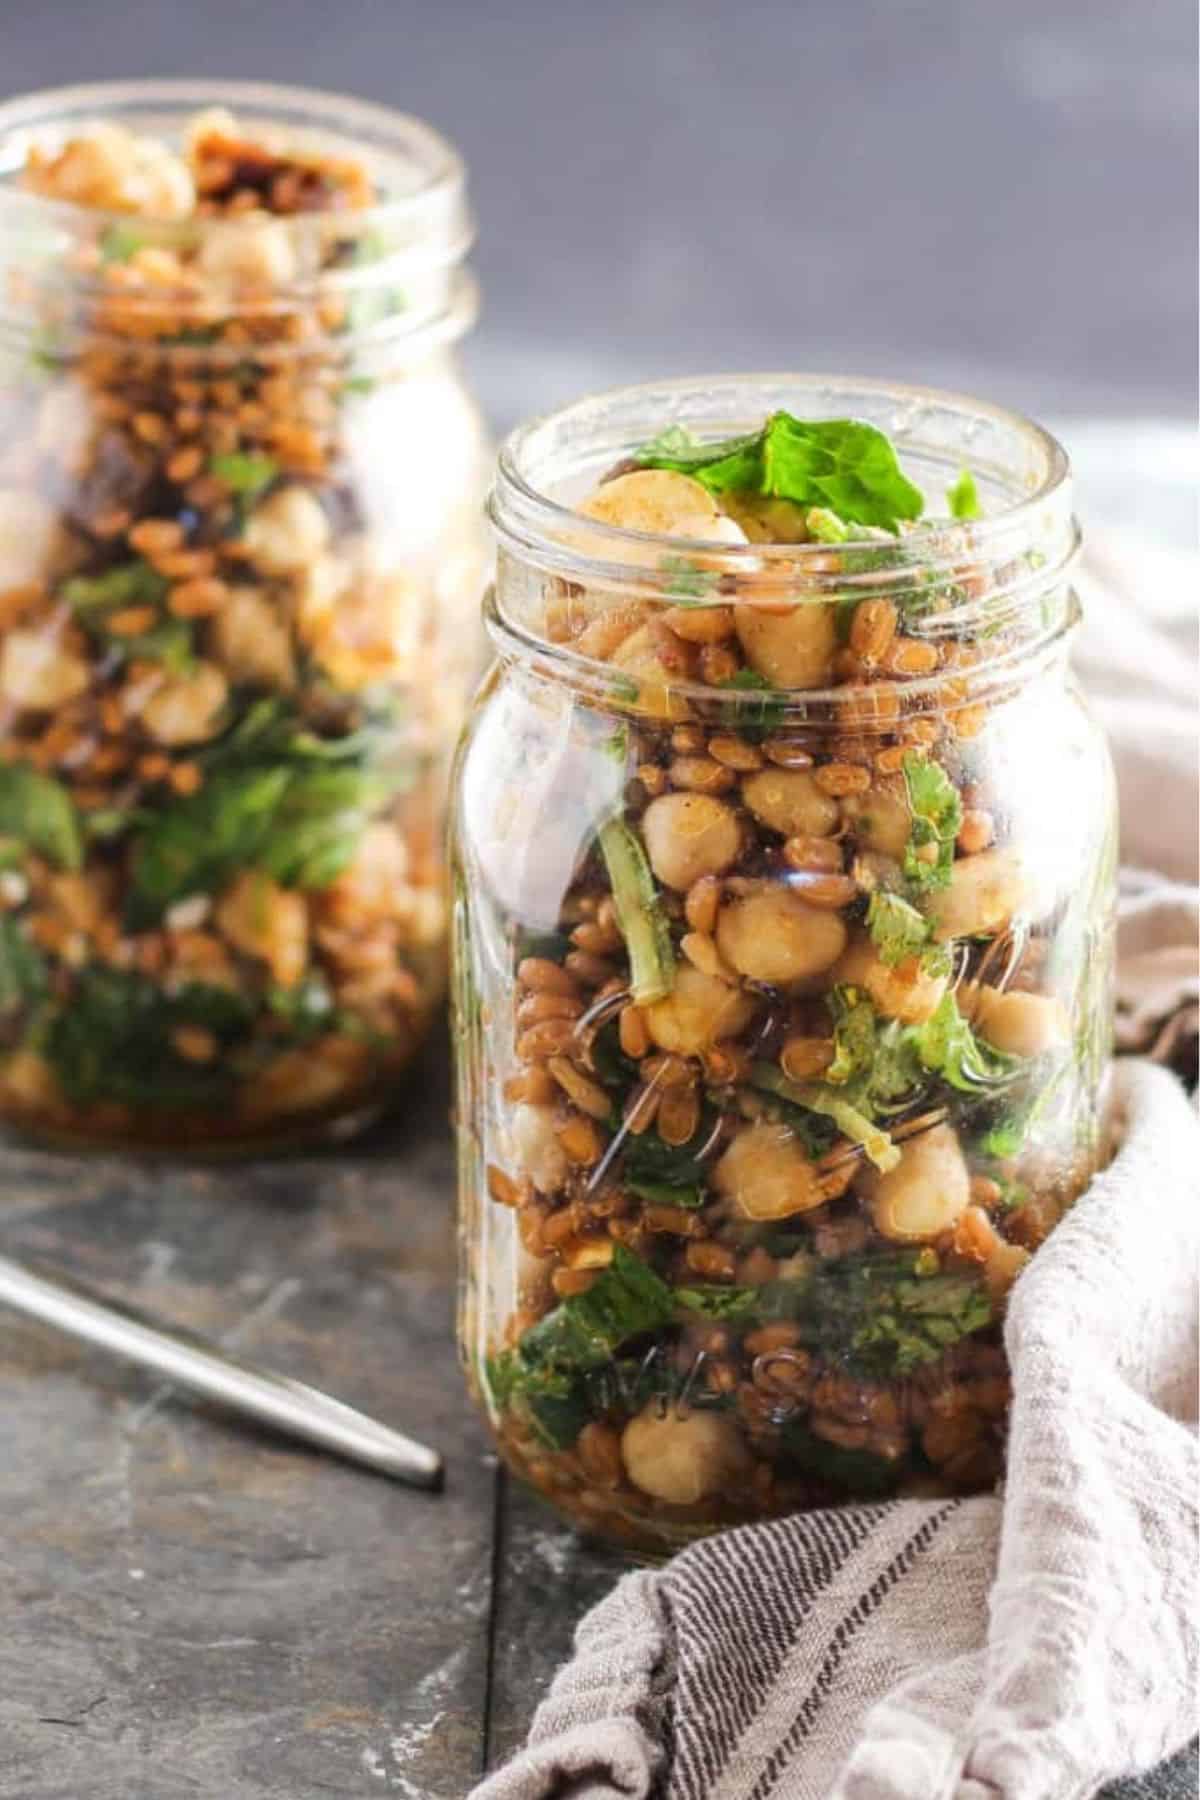 Chickpea Mason Jar Salad with Moroccan spices